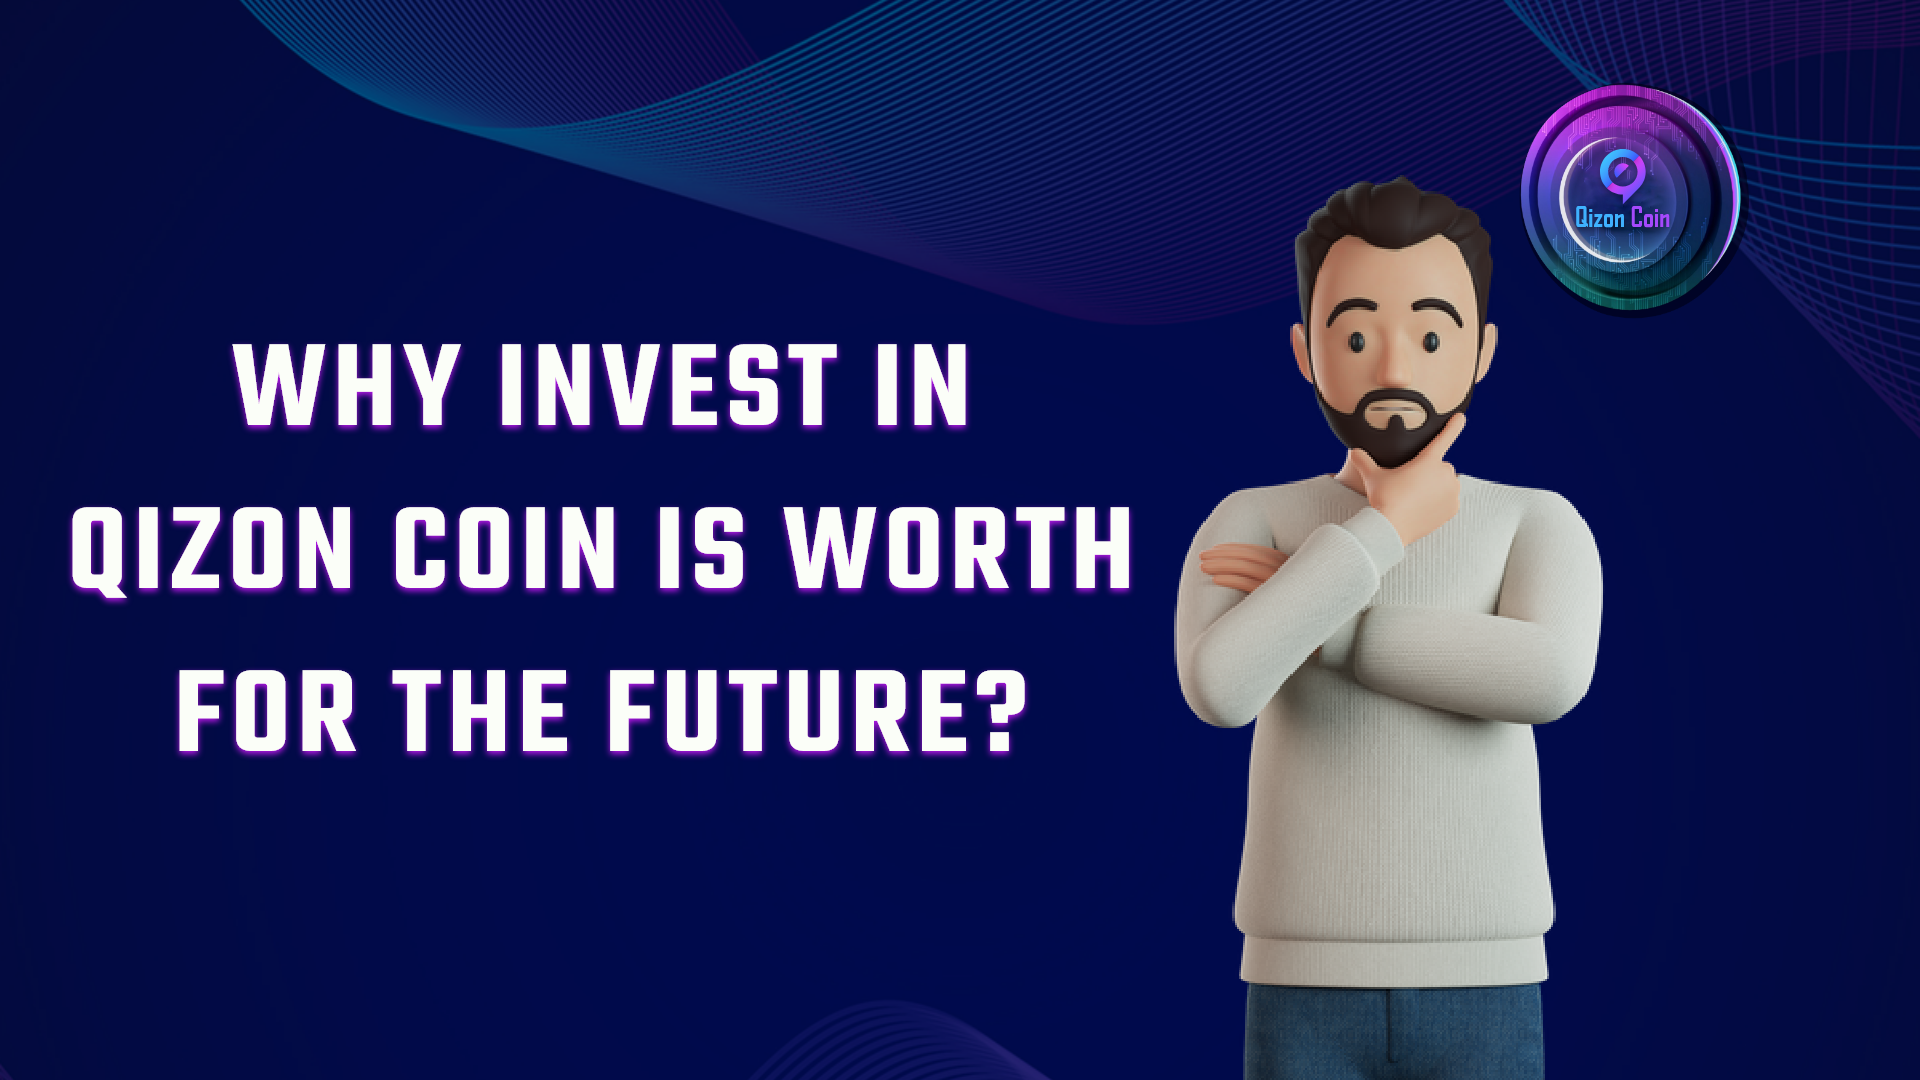 Why Invest in Qizon Coin